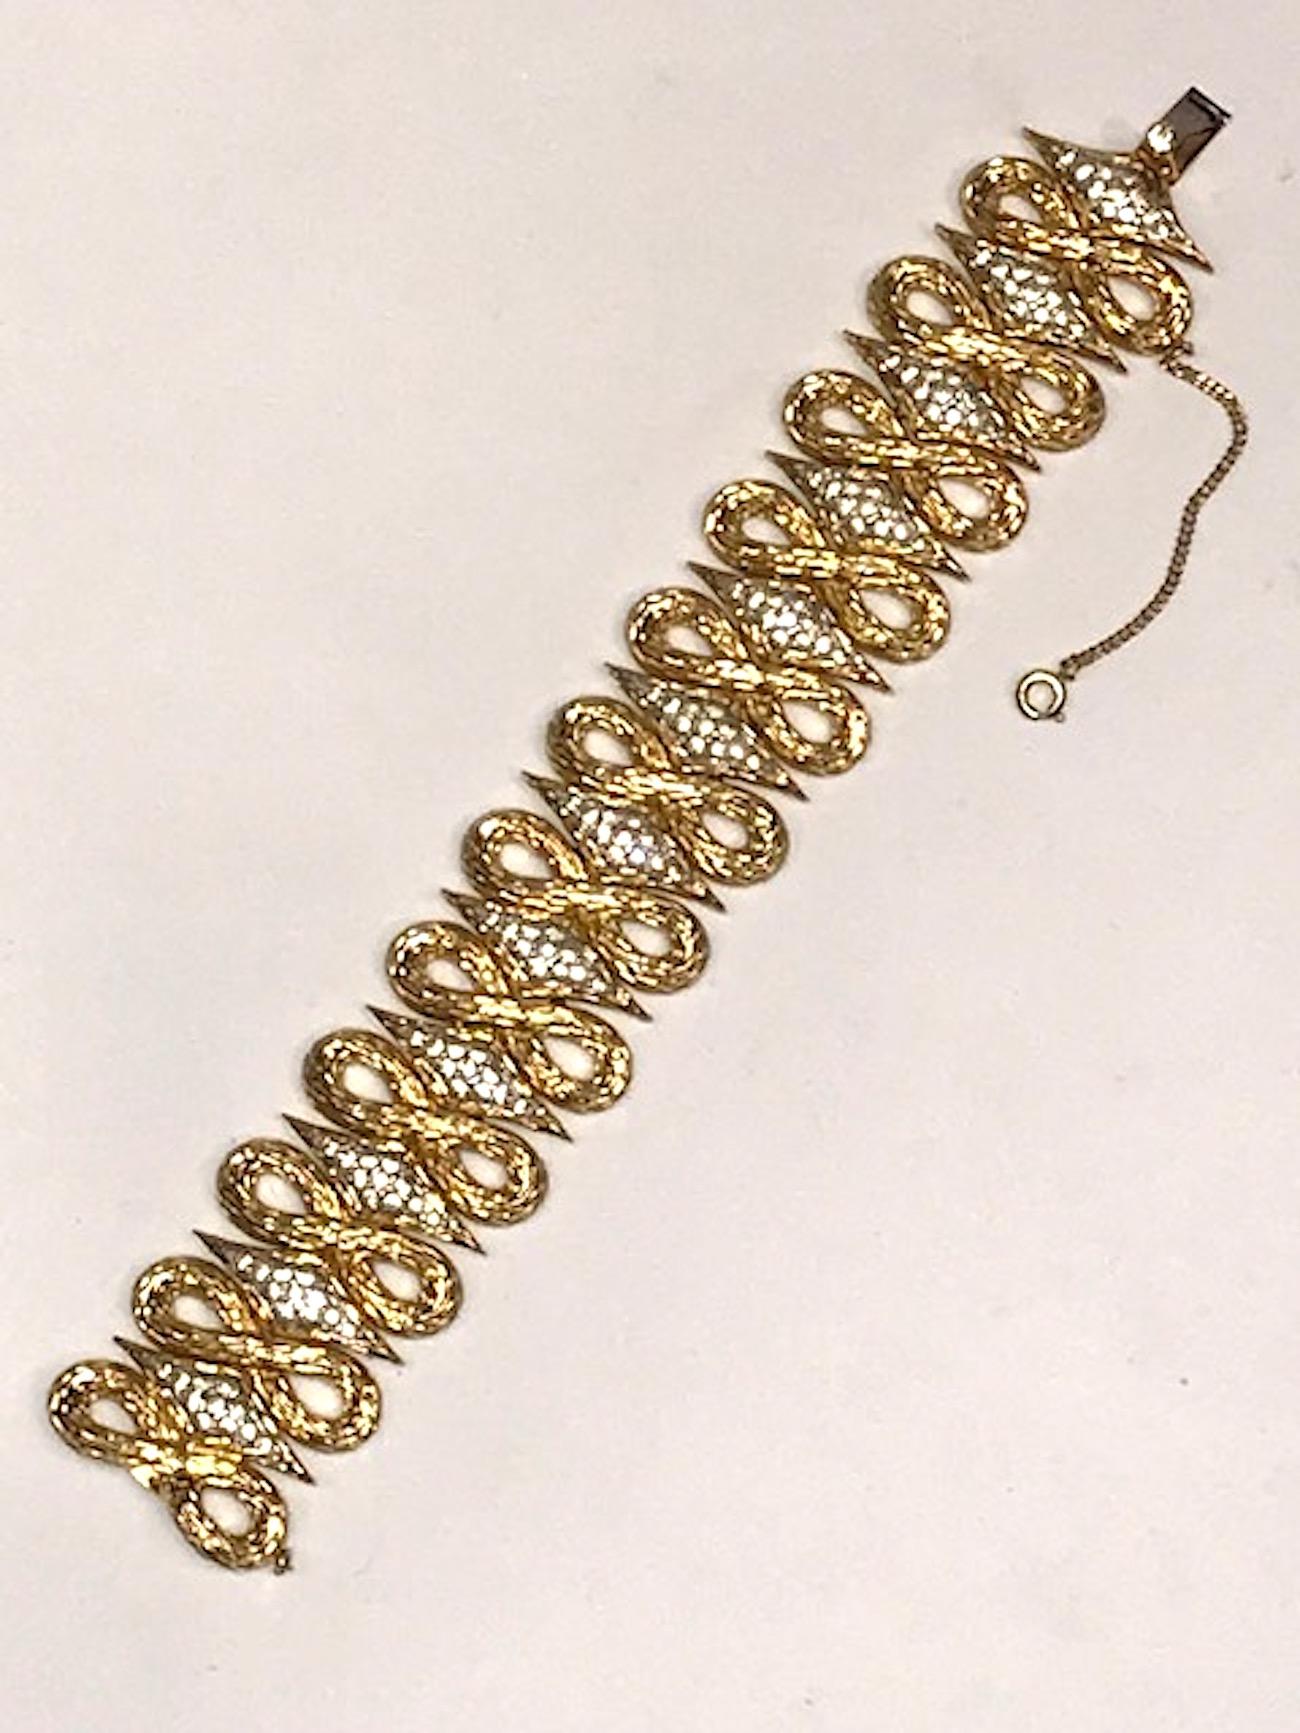 A beautiful abstract link design of textured gold figure eight links alternating with elongated and rhinestone set diamond shape links. The rhinestones are set into a rhodium plate finish and framed by the matching textured gold plate of the figure